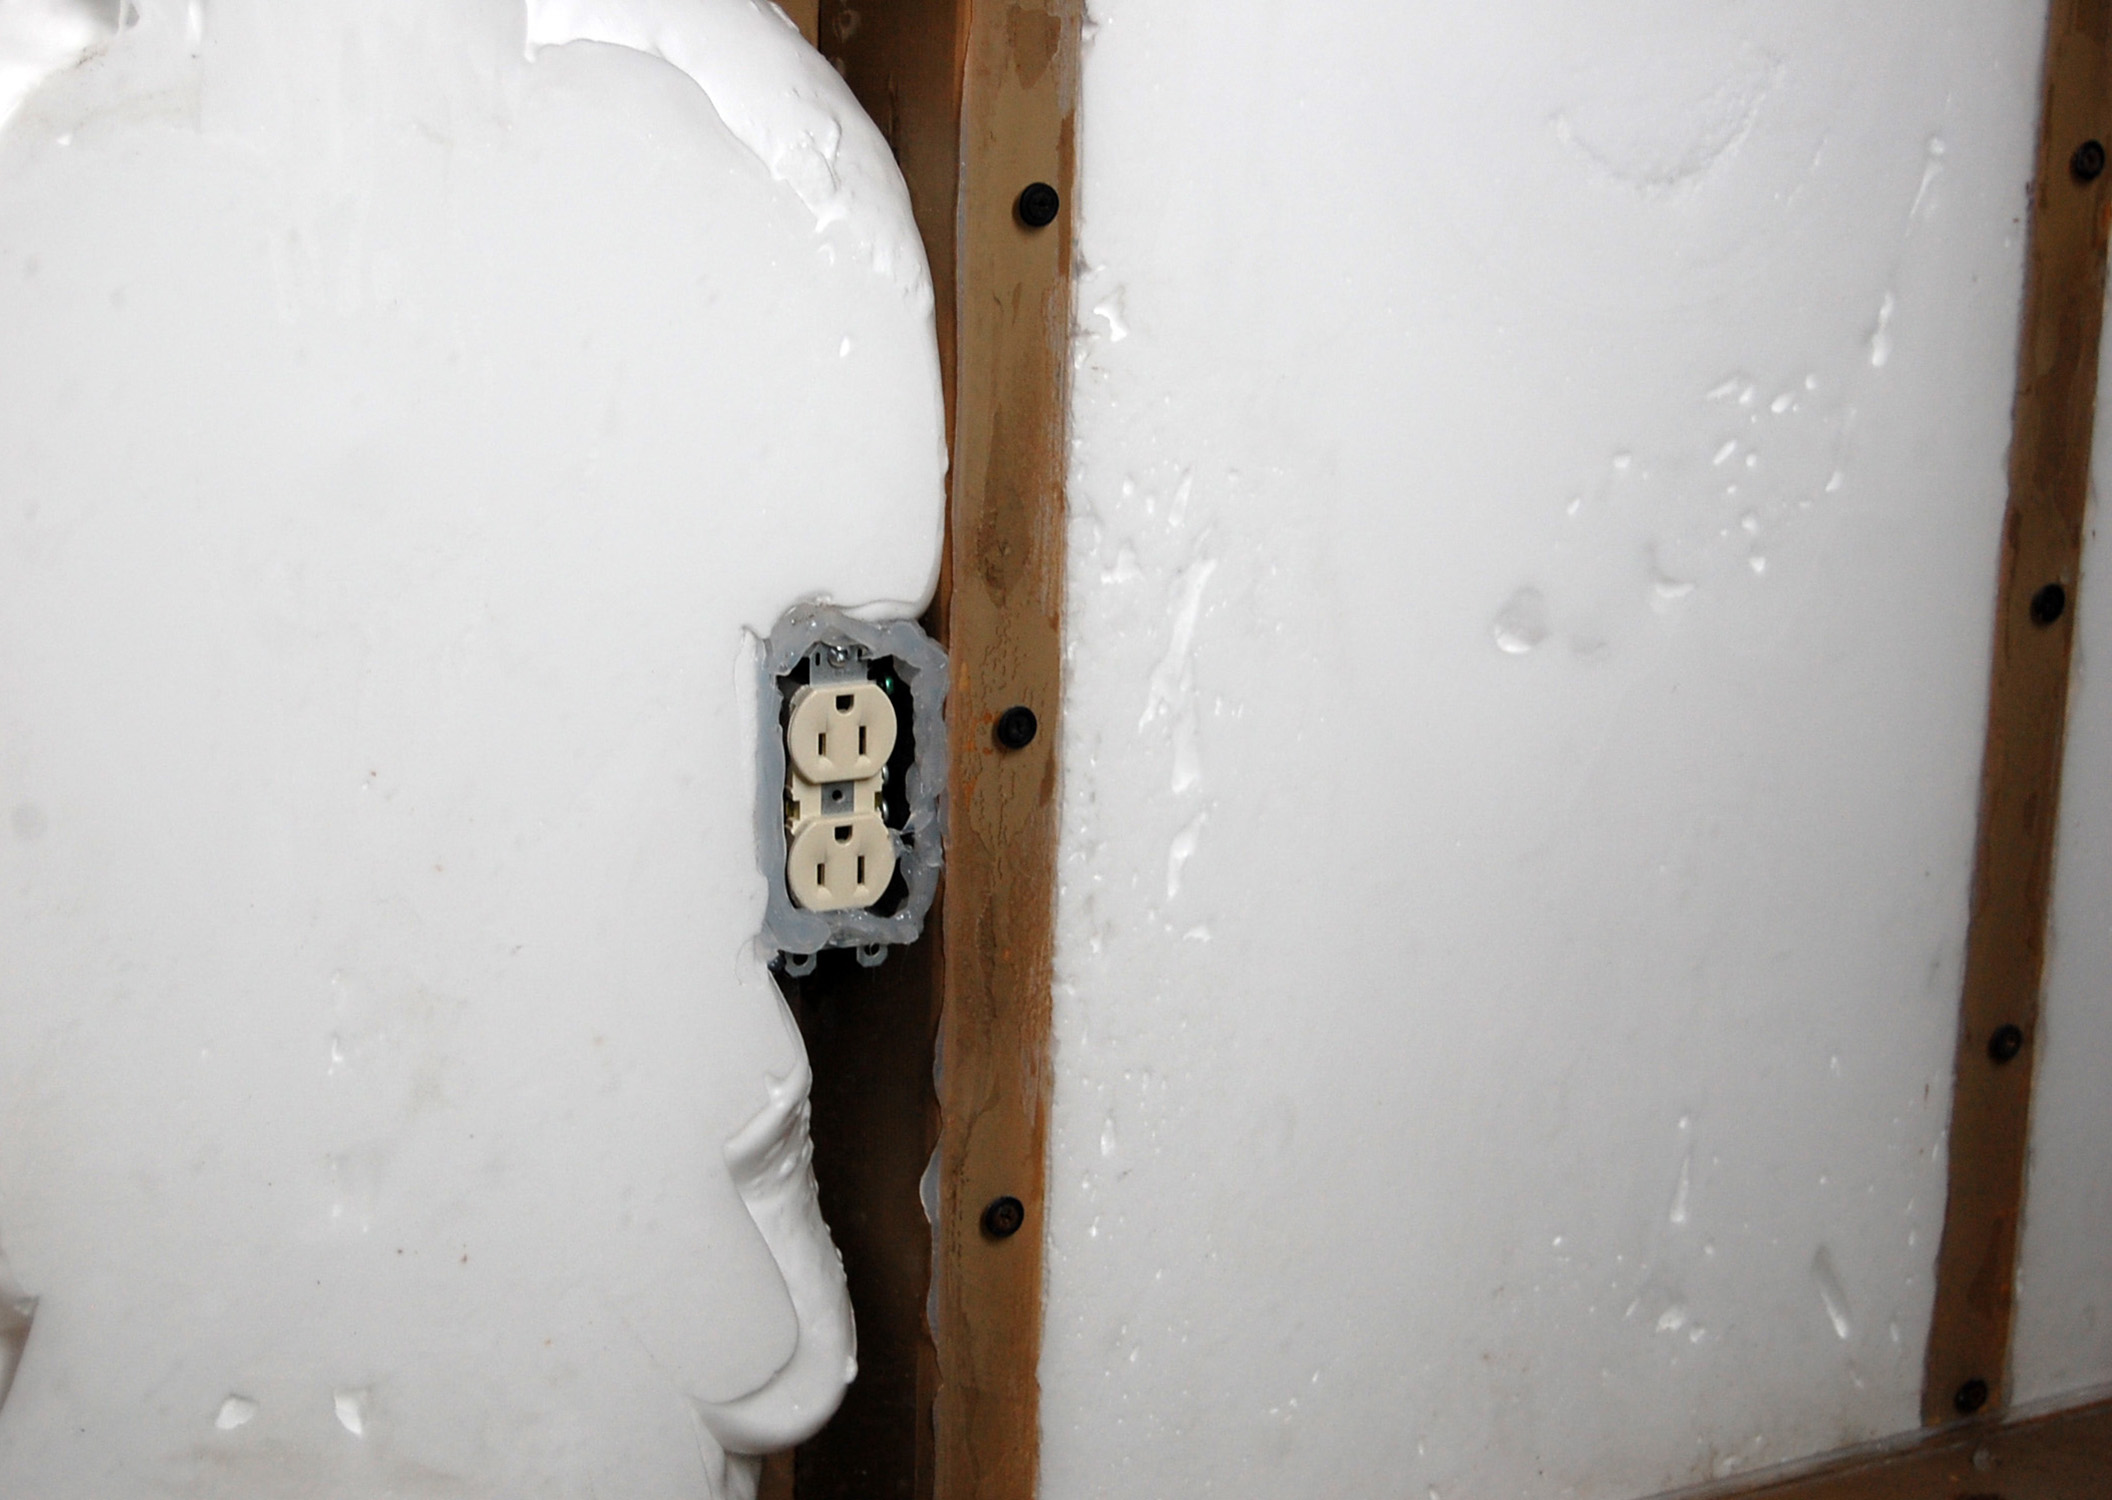 Installation--Foam flowing around electrical outlet